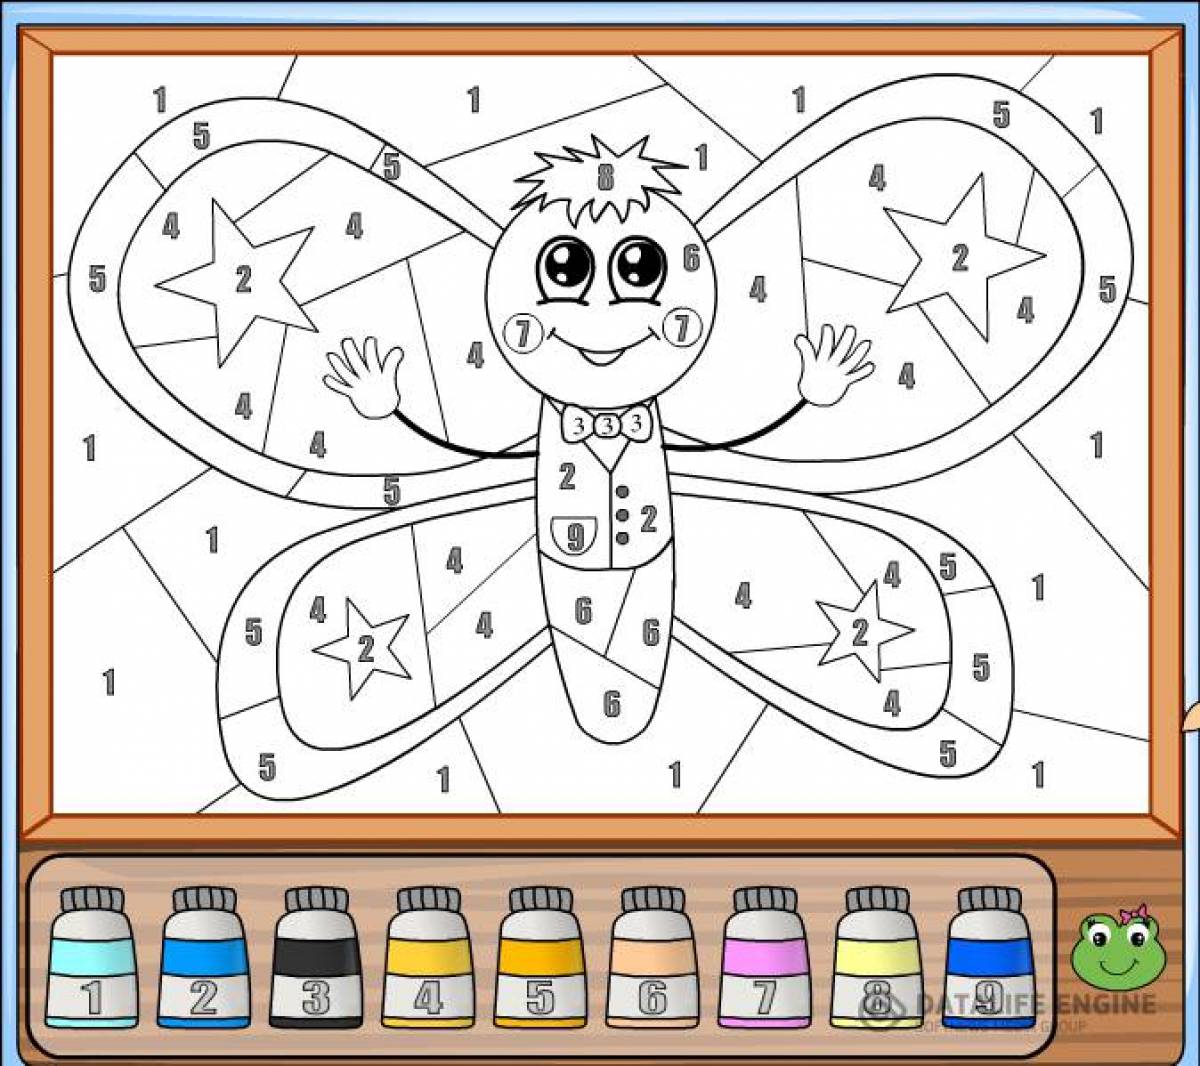 Amazing yandexgame coloring pages